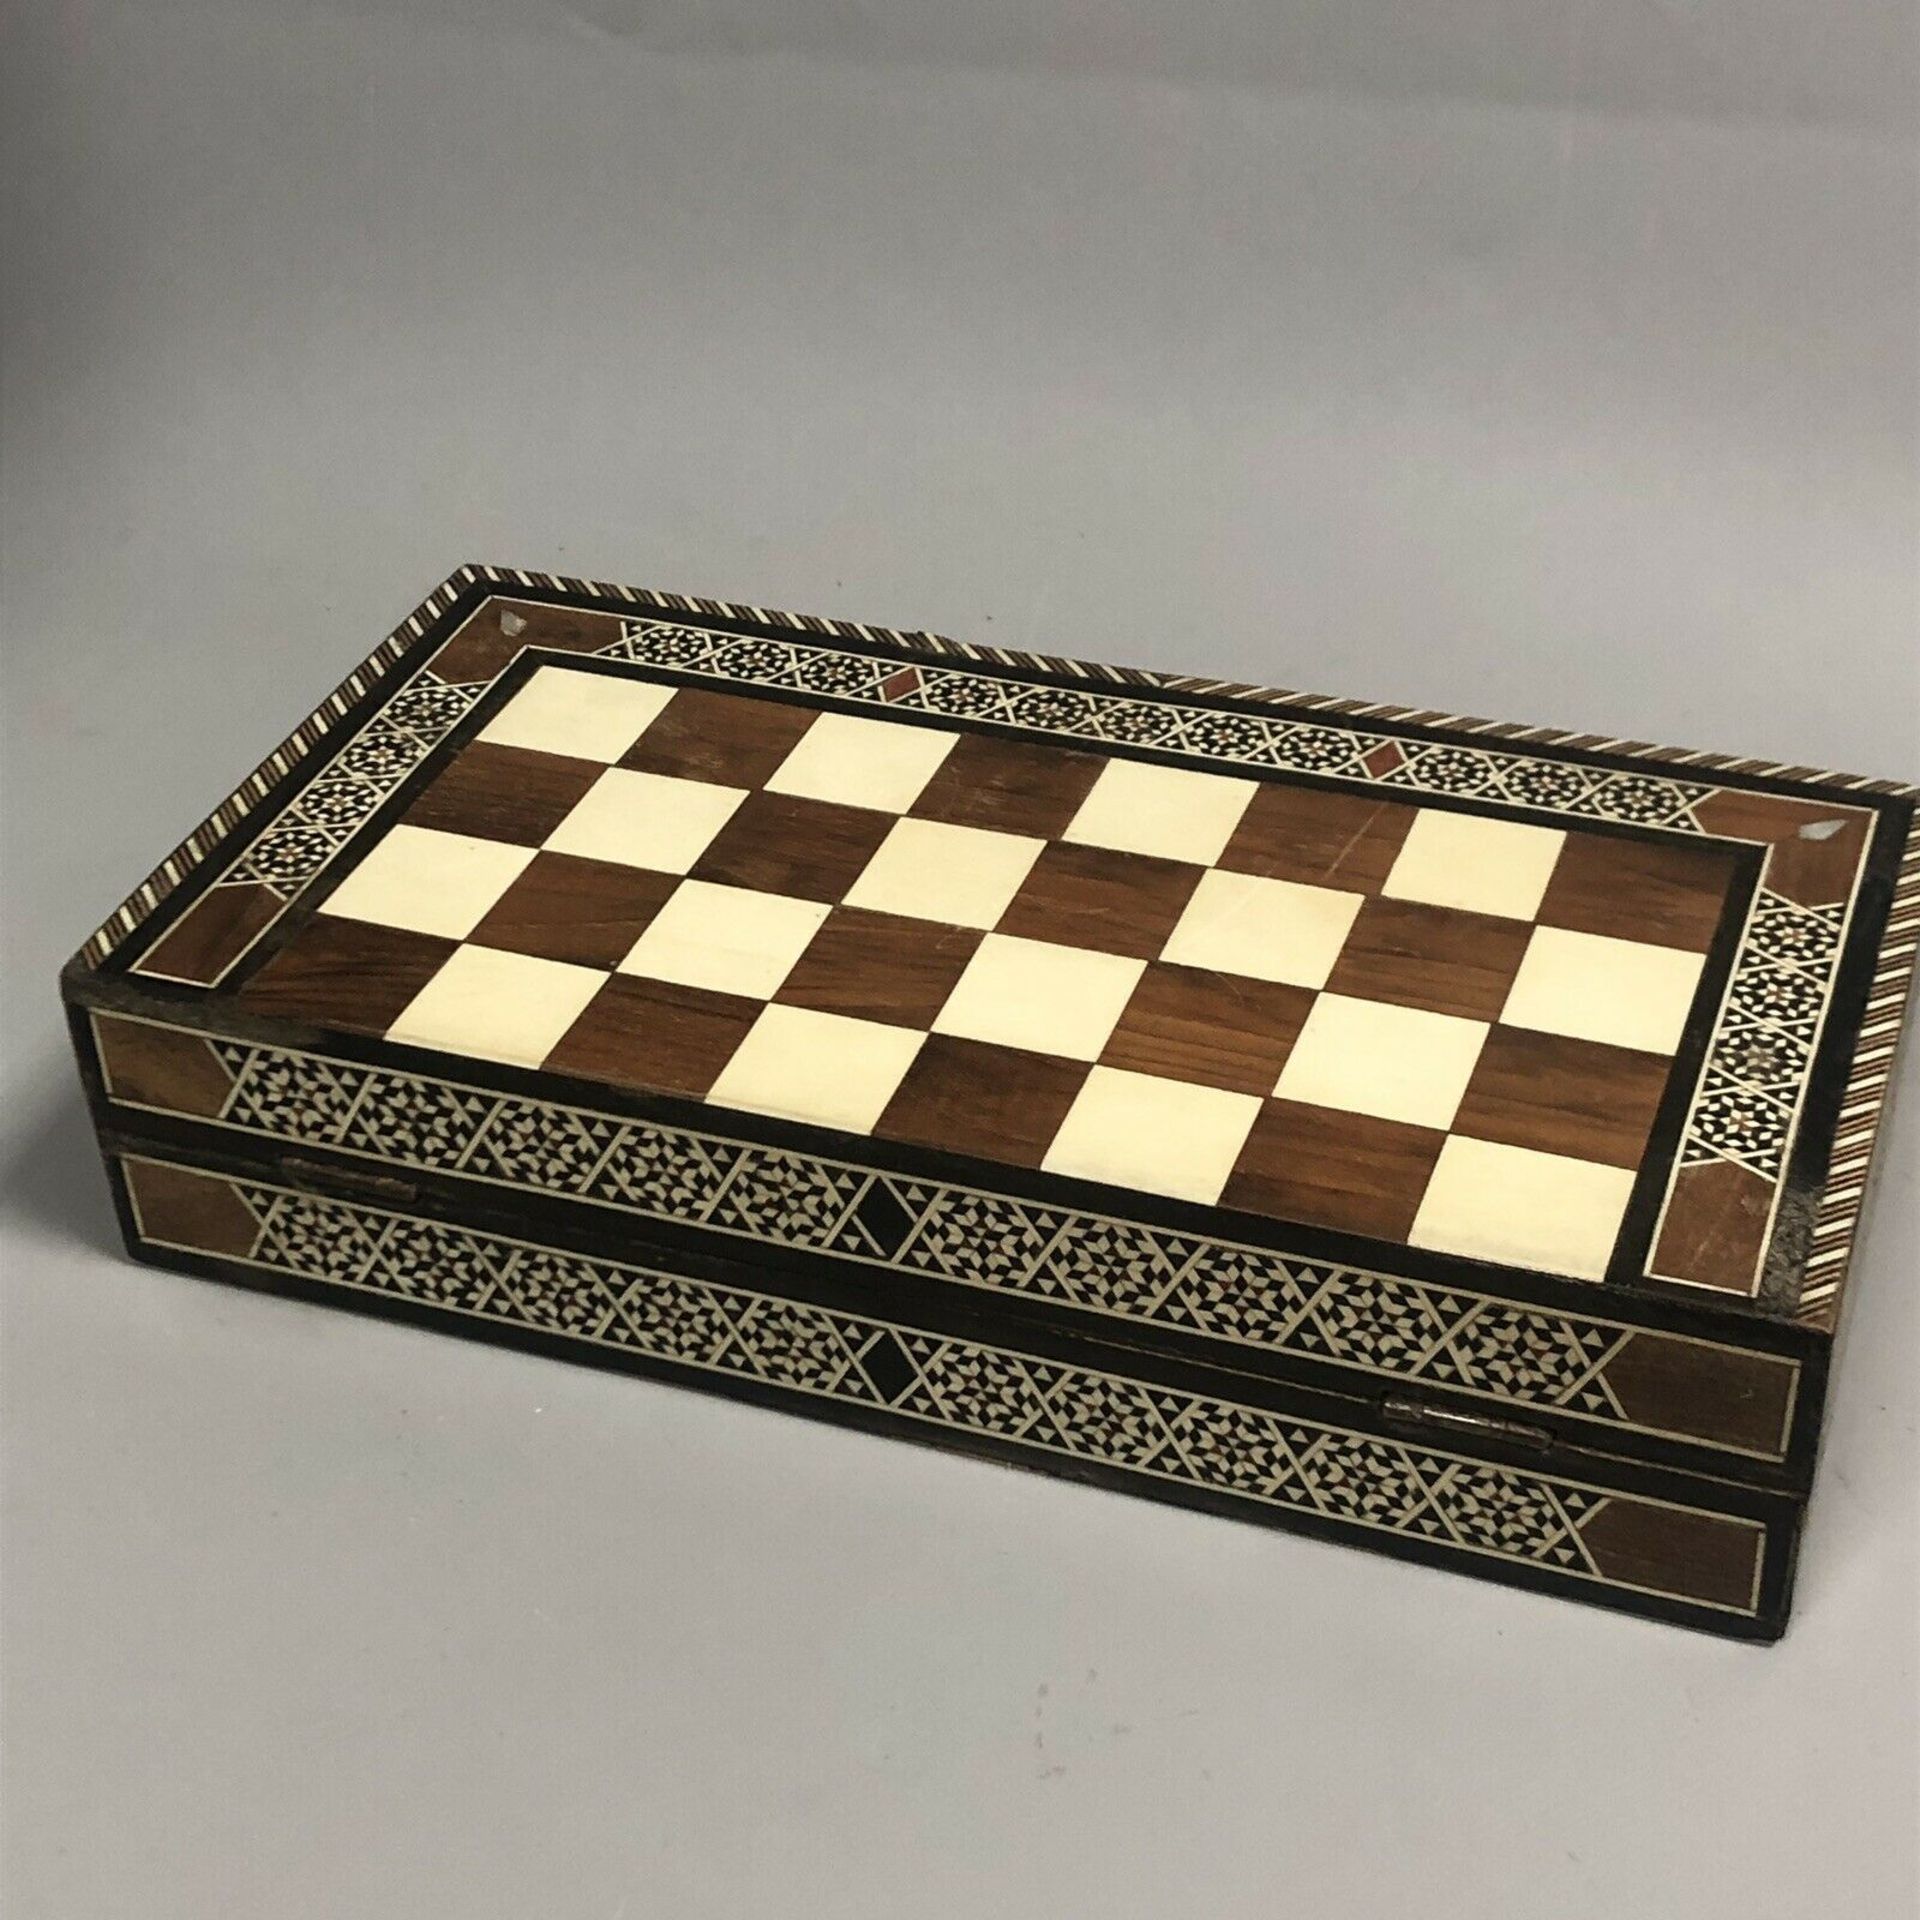 Lovely Antique Syrian Marquetry Mosaic Inlaid Folding Chess Box Backgammon Box - Image 4 of 8